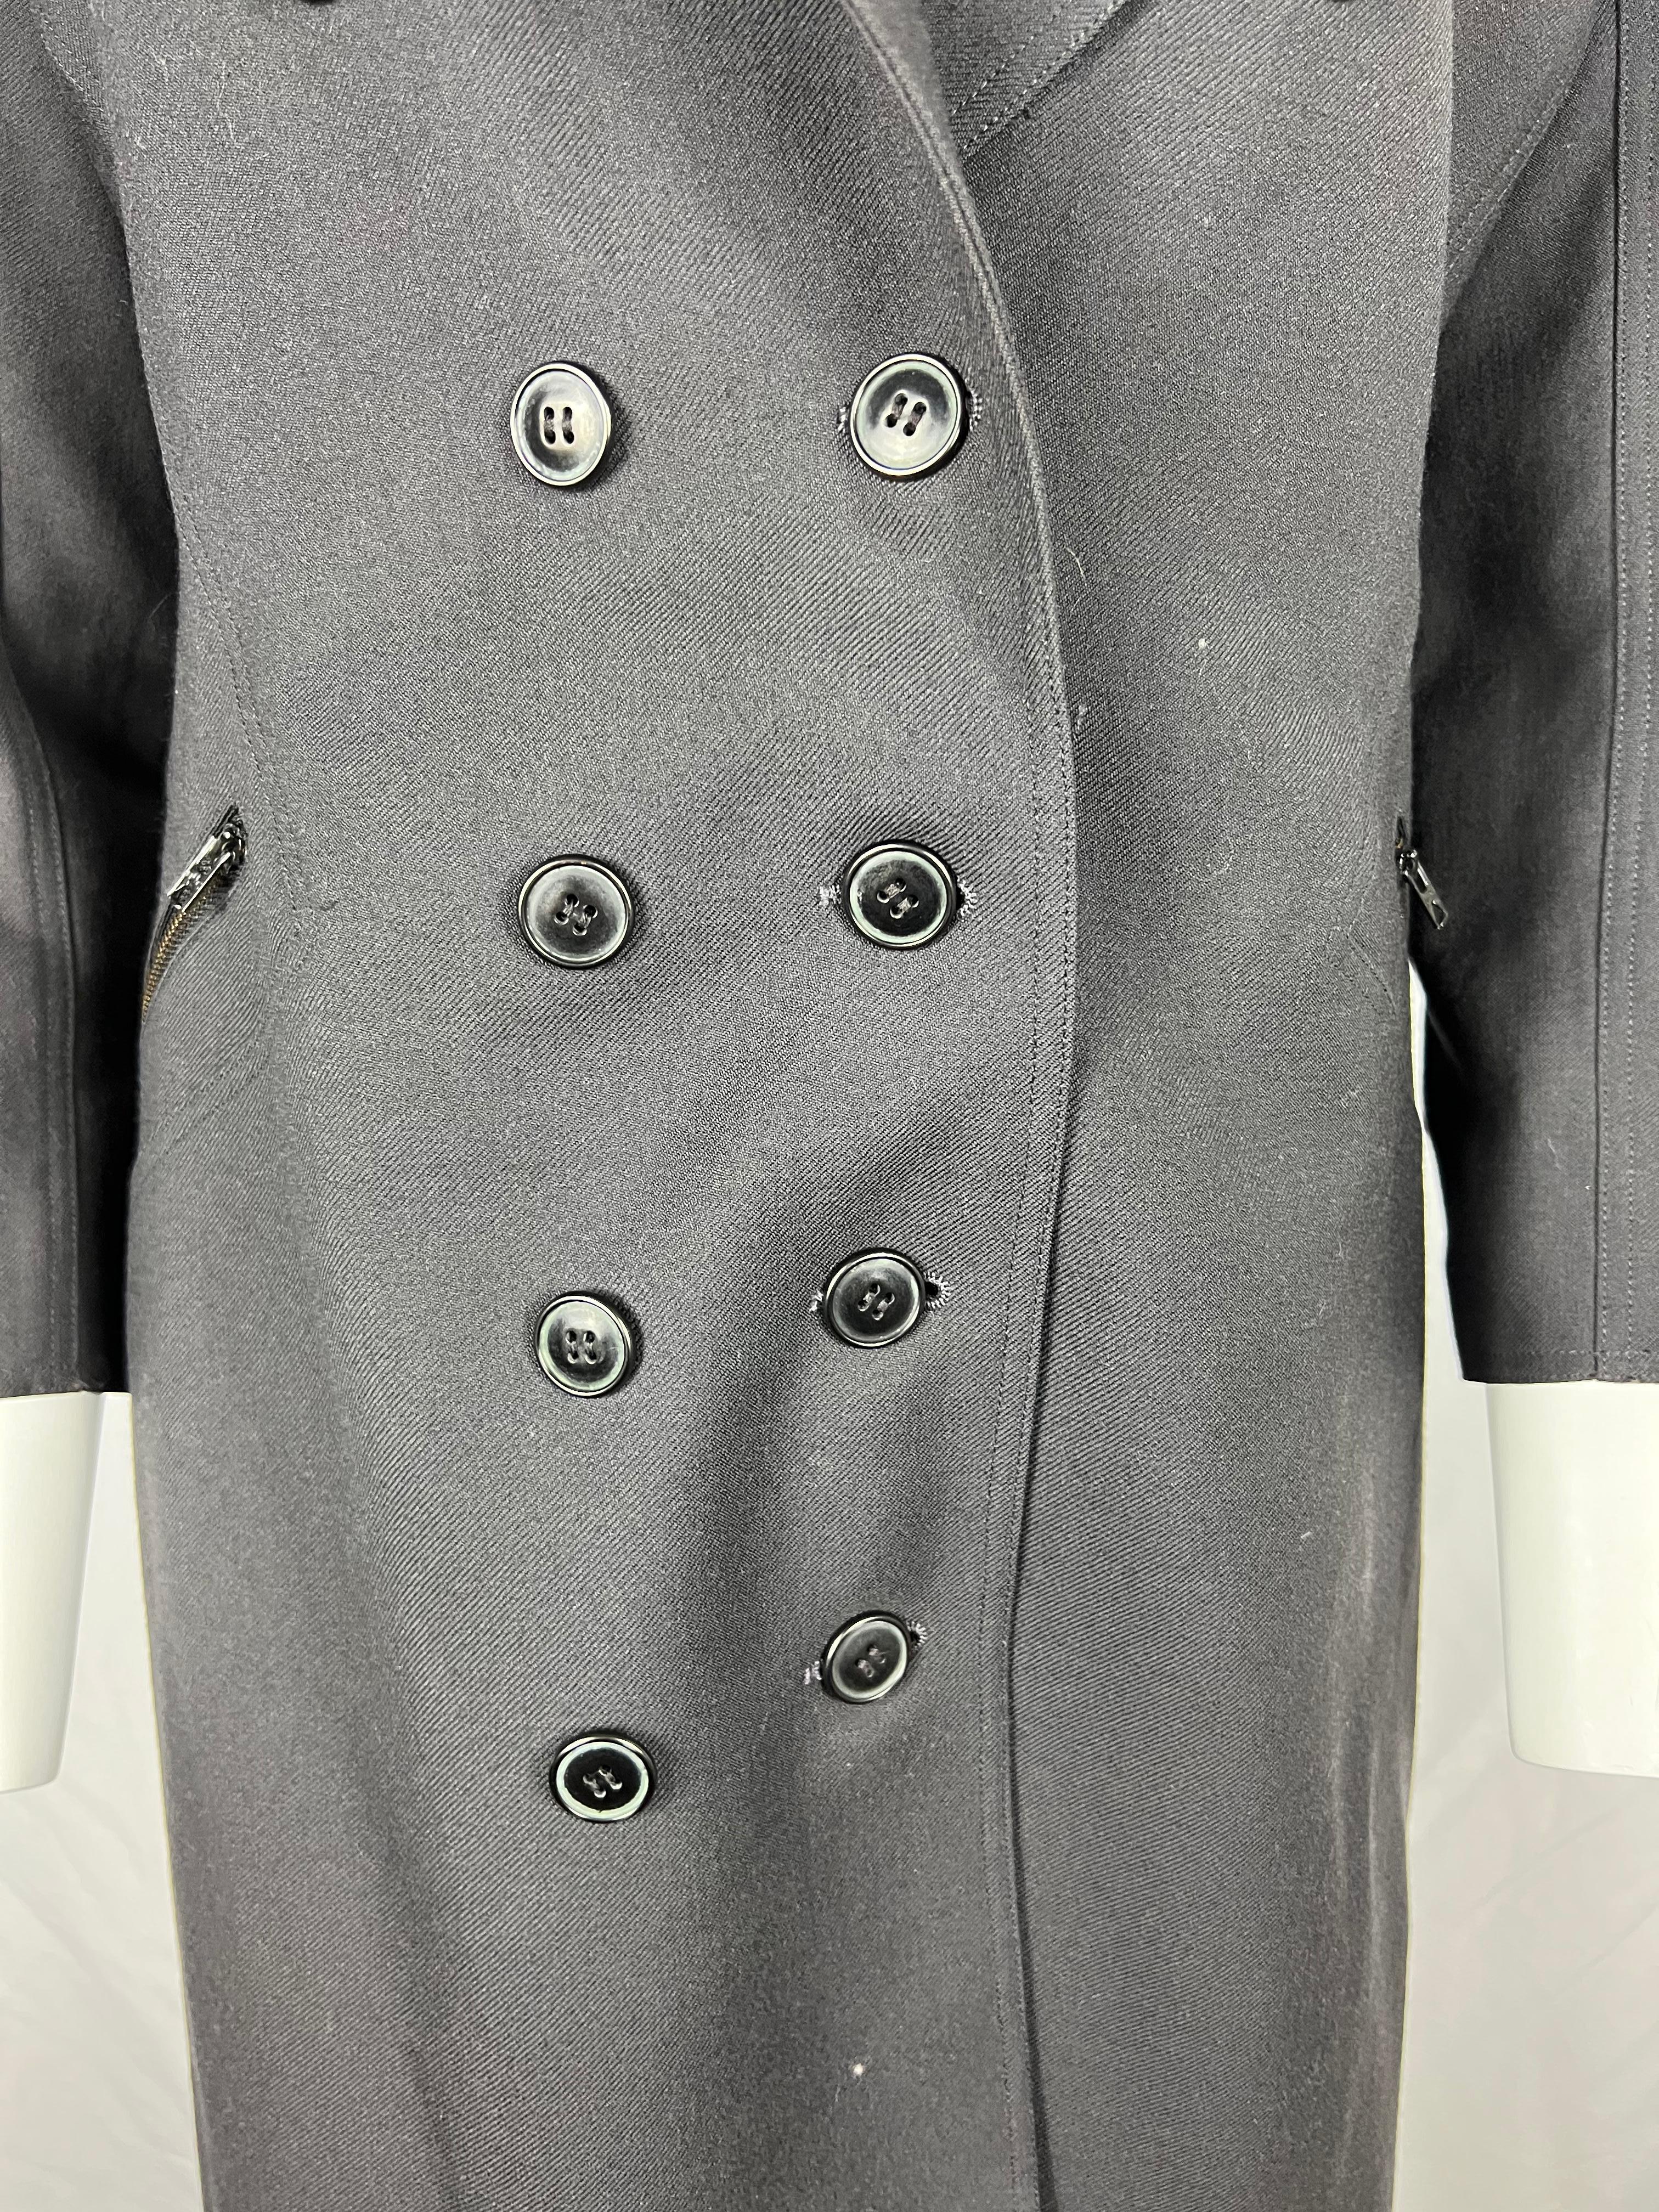 Vintage Alaïa Wool Coat Dark Grey, Size 8
• 3/4 sleeves
• Mid length
• Deep V-neck
• Front button closure
• Ruffled details in the back
• Wide peak collar
• Made in France
 
Item details:
​Each fold and drape of this vintage Alaïa coat was made to